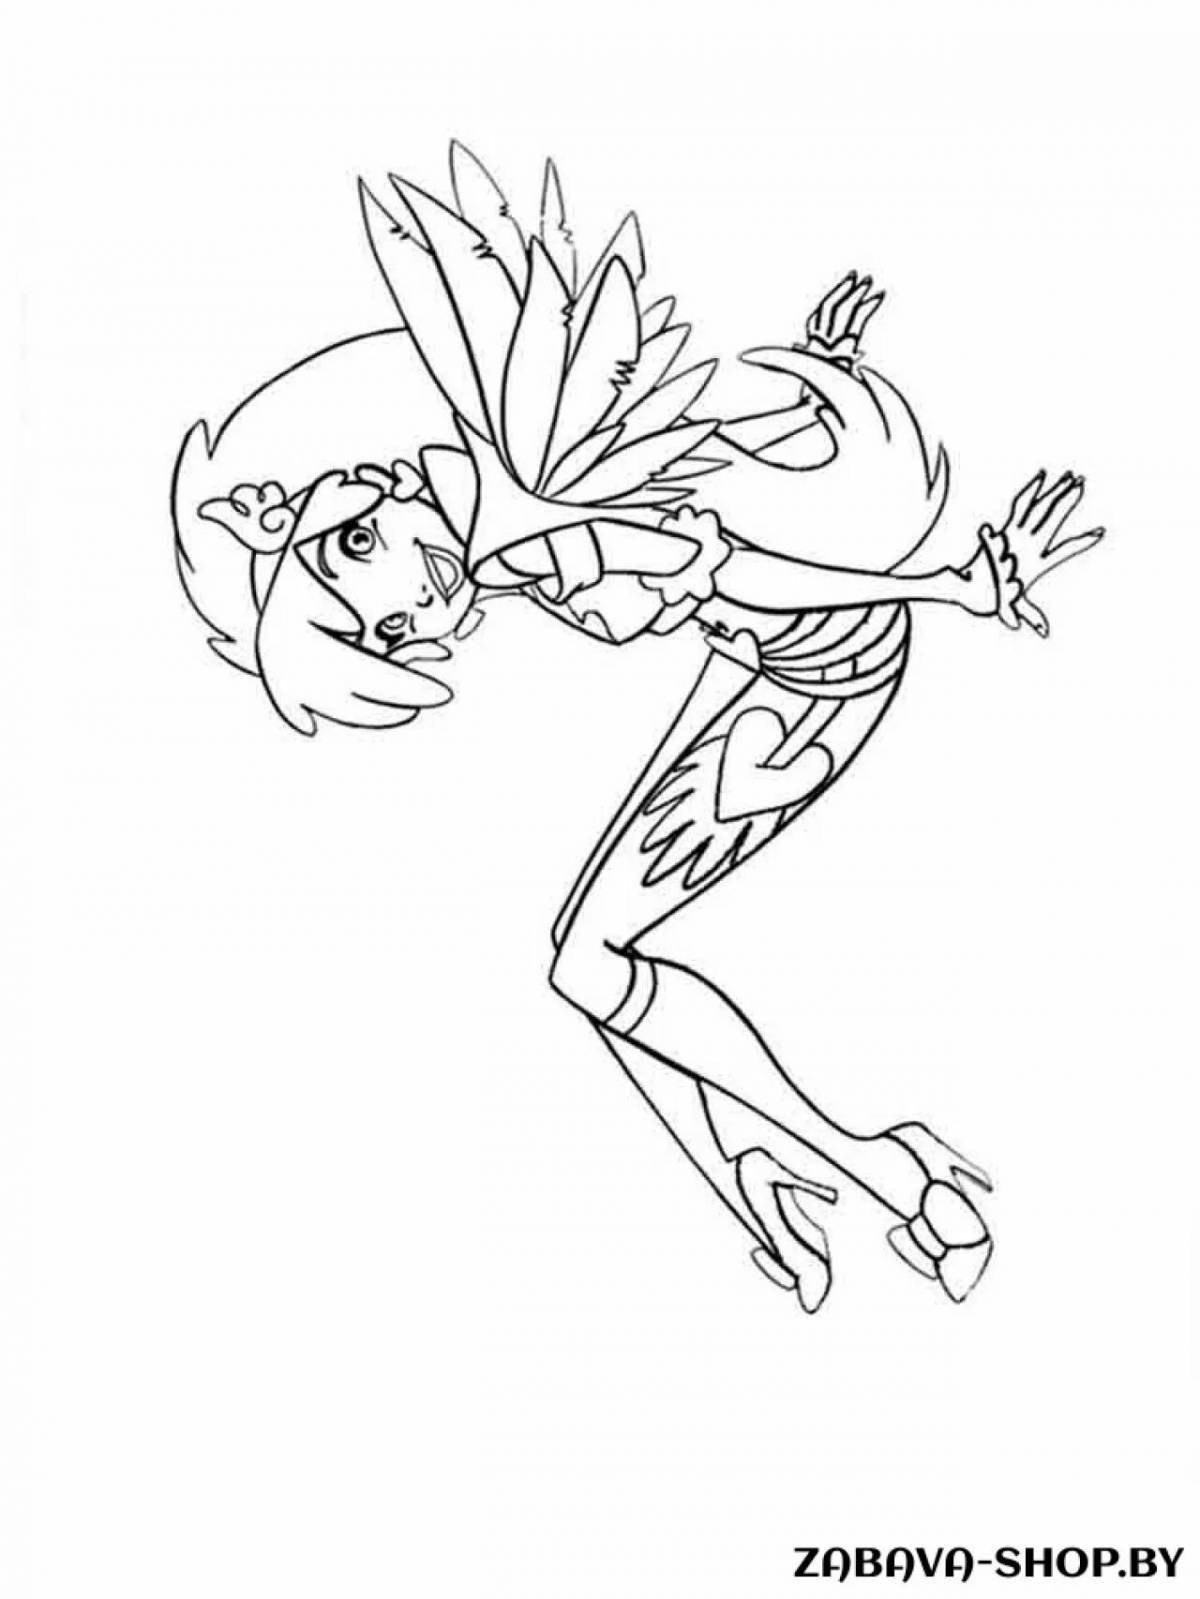 Coloring page cheerful raf